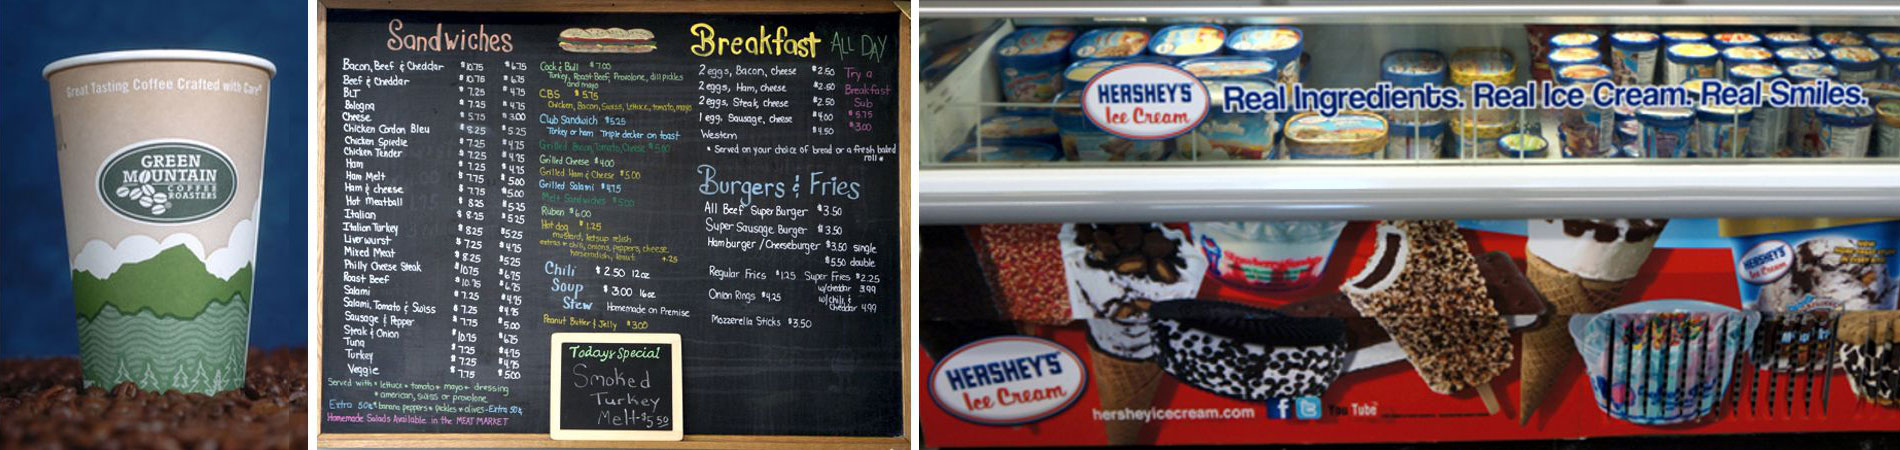 The Center MiniMart's sandwich and breakfast board and ice cream selection